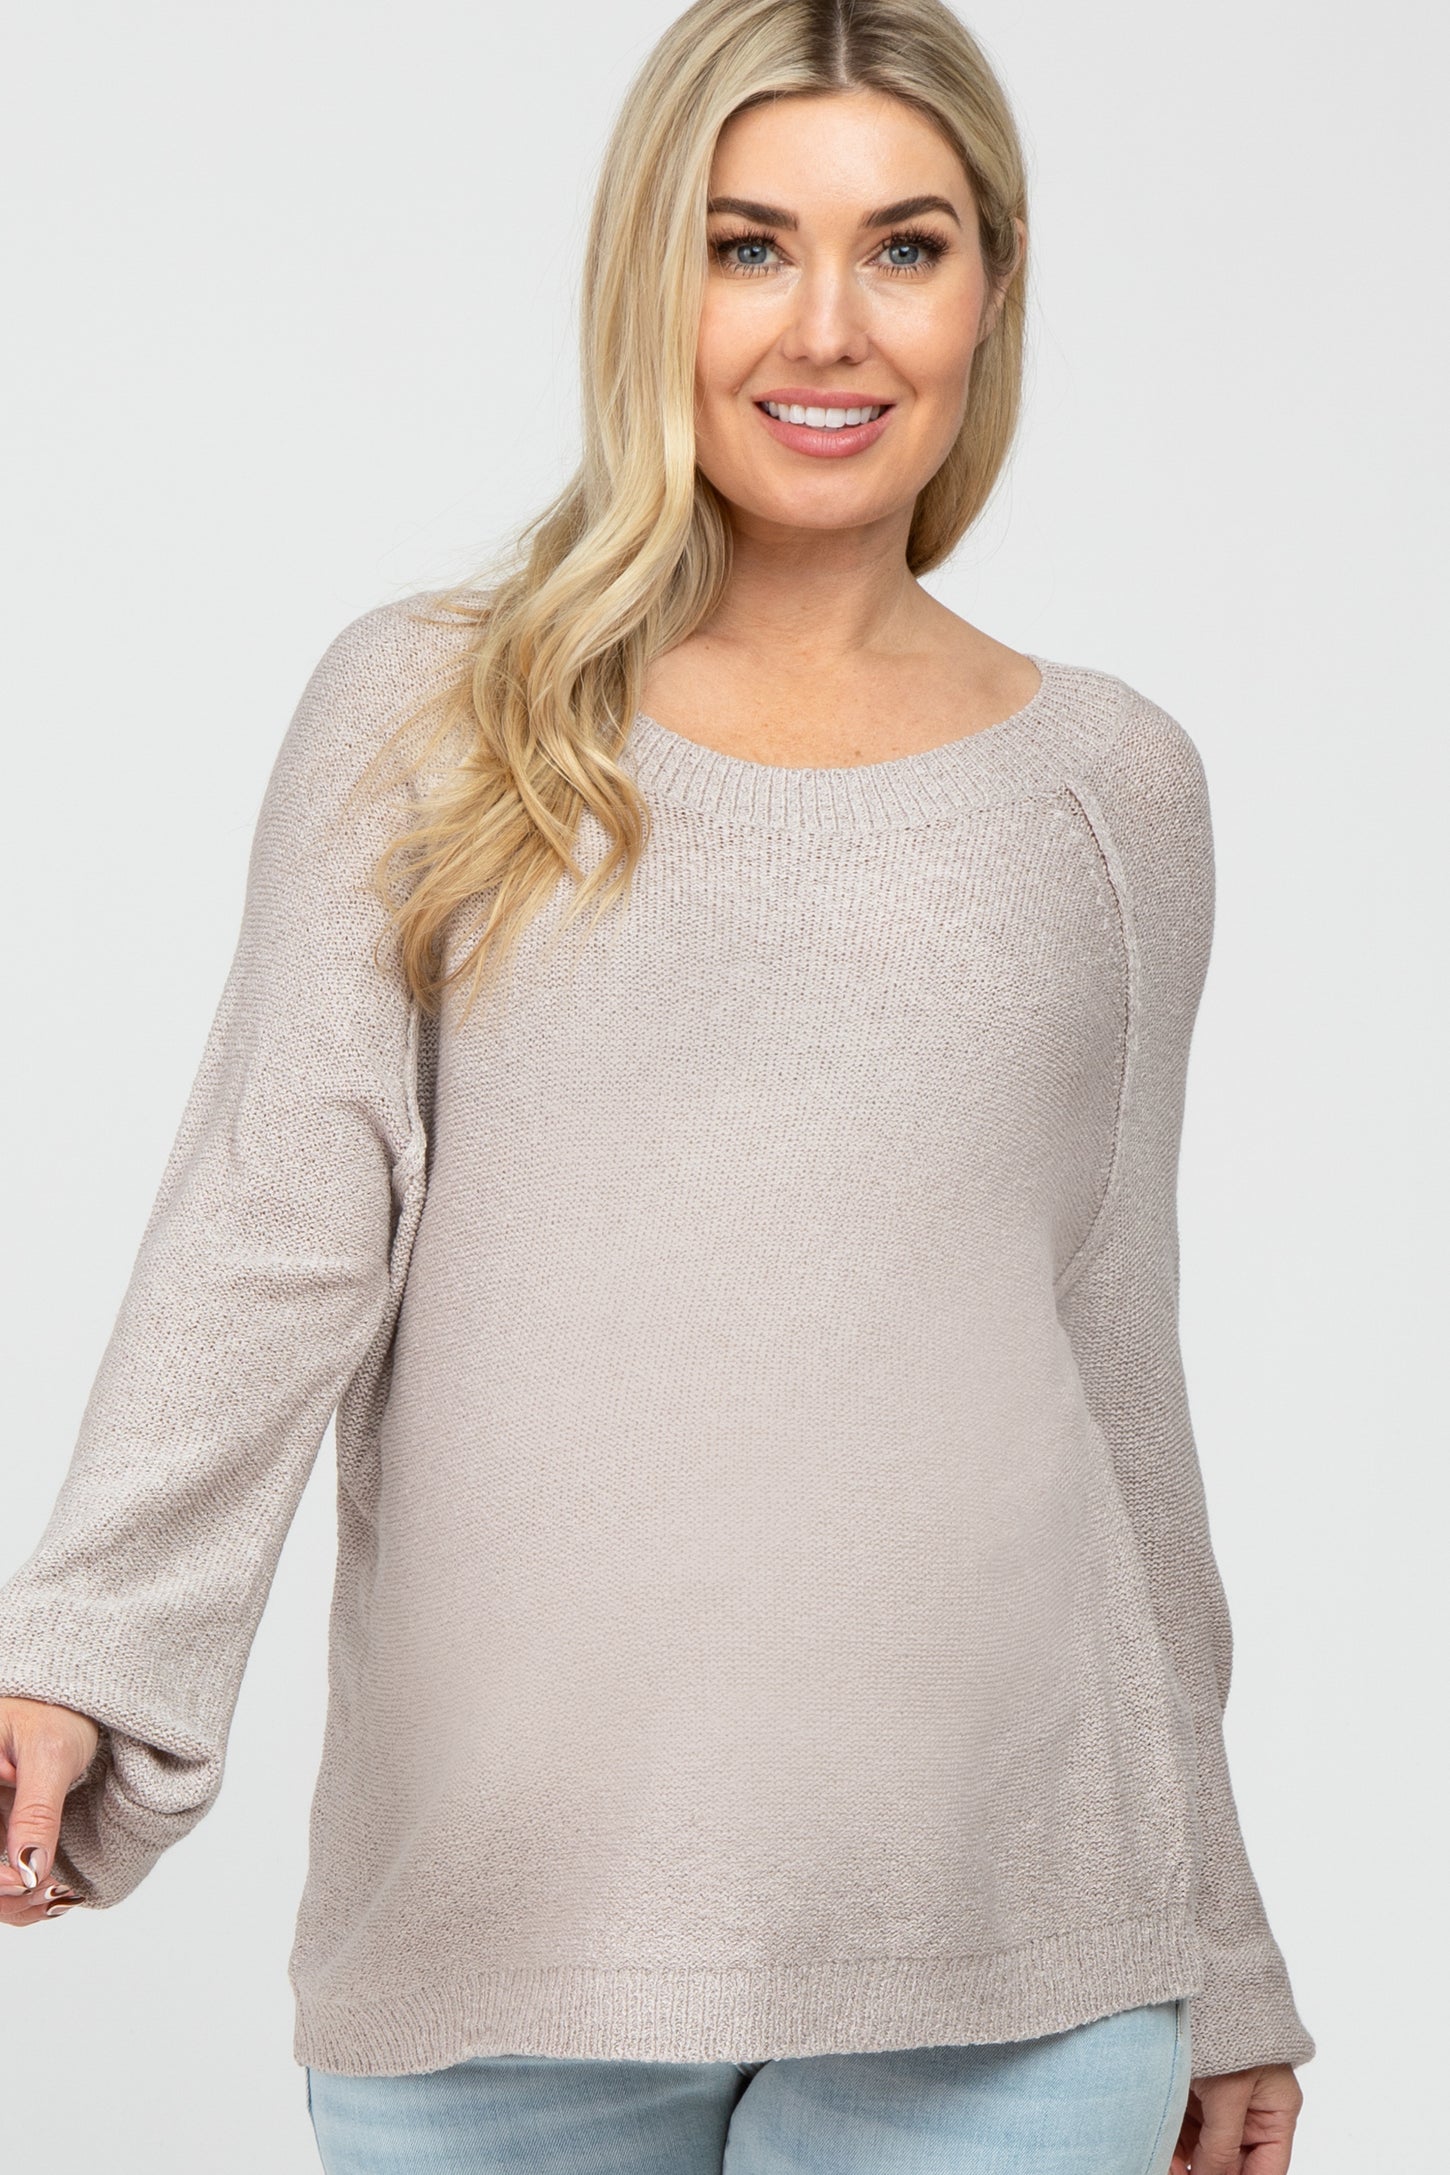 Taupe Knit Lightweight Maternity Sweater